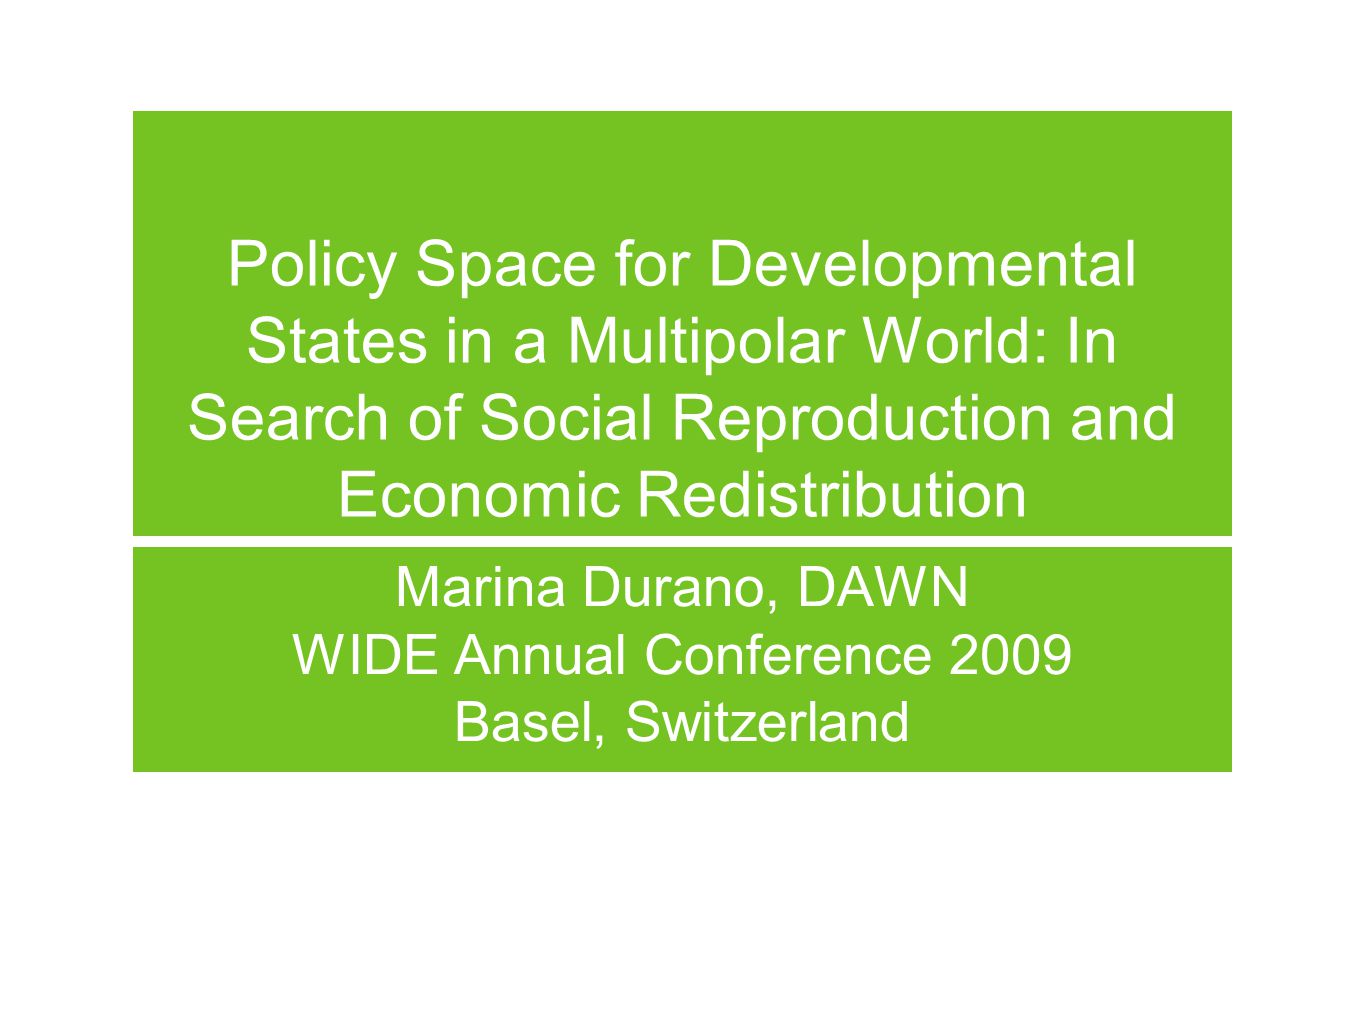 Policy Space for Developmental States in a Multipolar World: In Search of Social Reproduction and Economic Redistribution Marina Durano, DAWN WIDE Annual Conference 2009 Basel, Switzerland